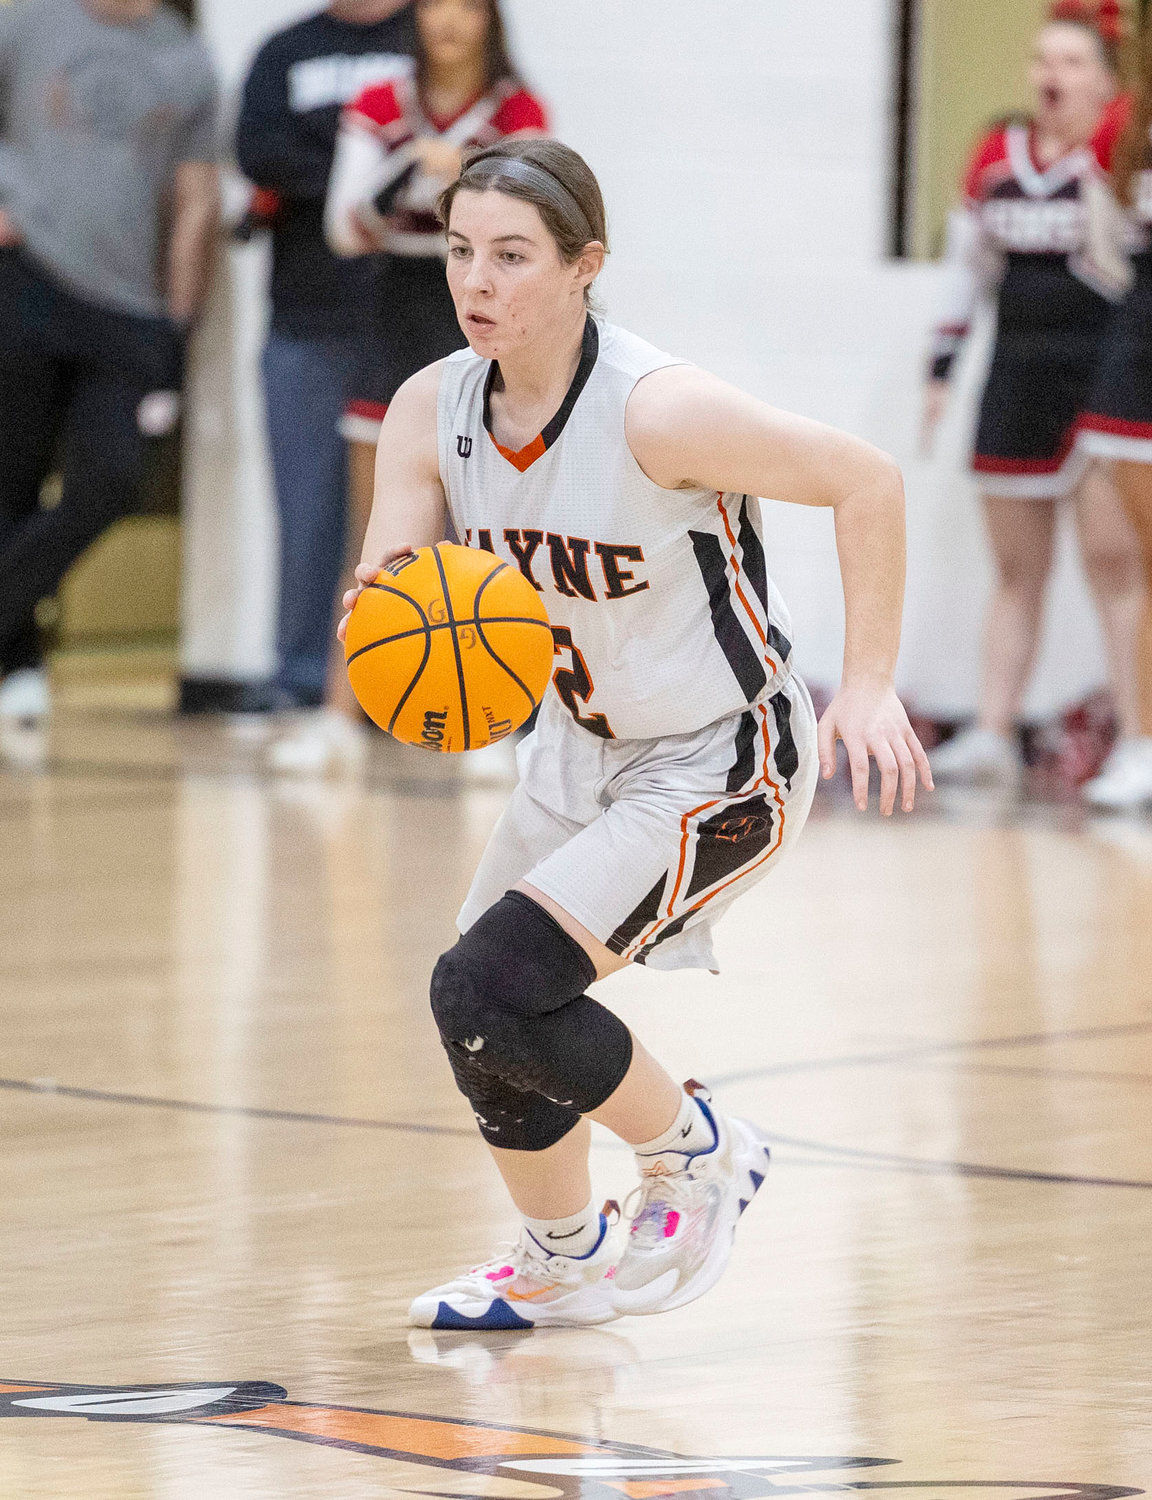 Wayne senior Kaylee Madden led the Lady Bulldogs with 19 points in their loss to Konawa last Friday. Wayne is in their final stretch of the regular season and will be at Southwest Covenant for Districts next Friday.